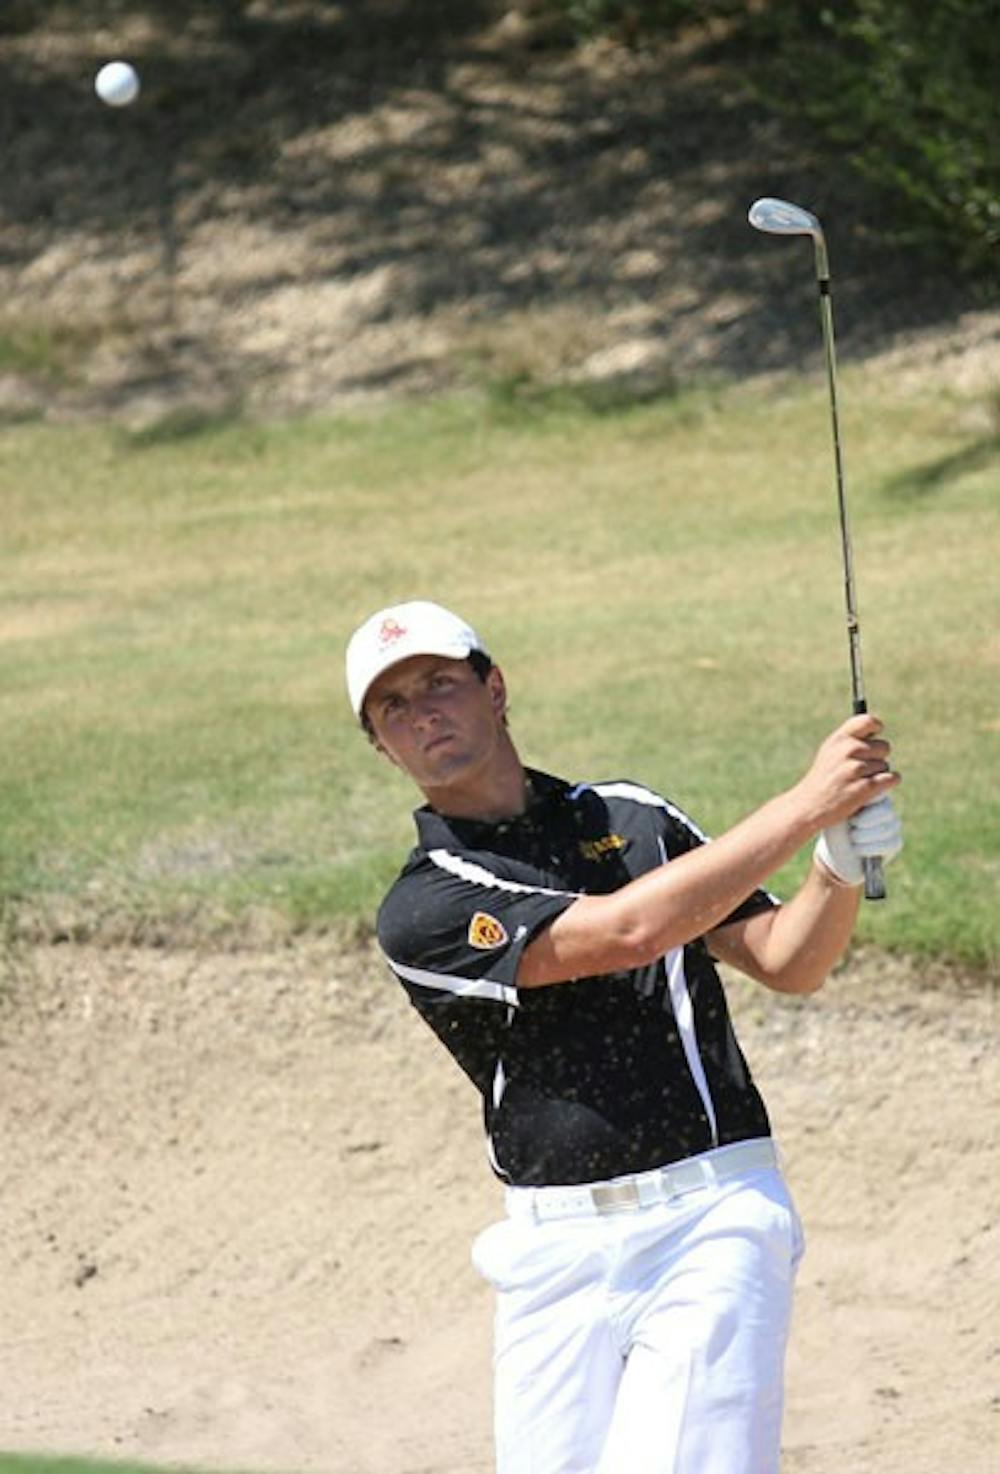 Junior Jon Rahm launches the ball out of a sand trap during an ASU golf practice on Sept. 21, 2012 prior to the Pac-12 Preview in Oregon. (Photo by Kyle Newman)